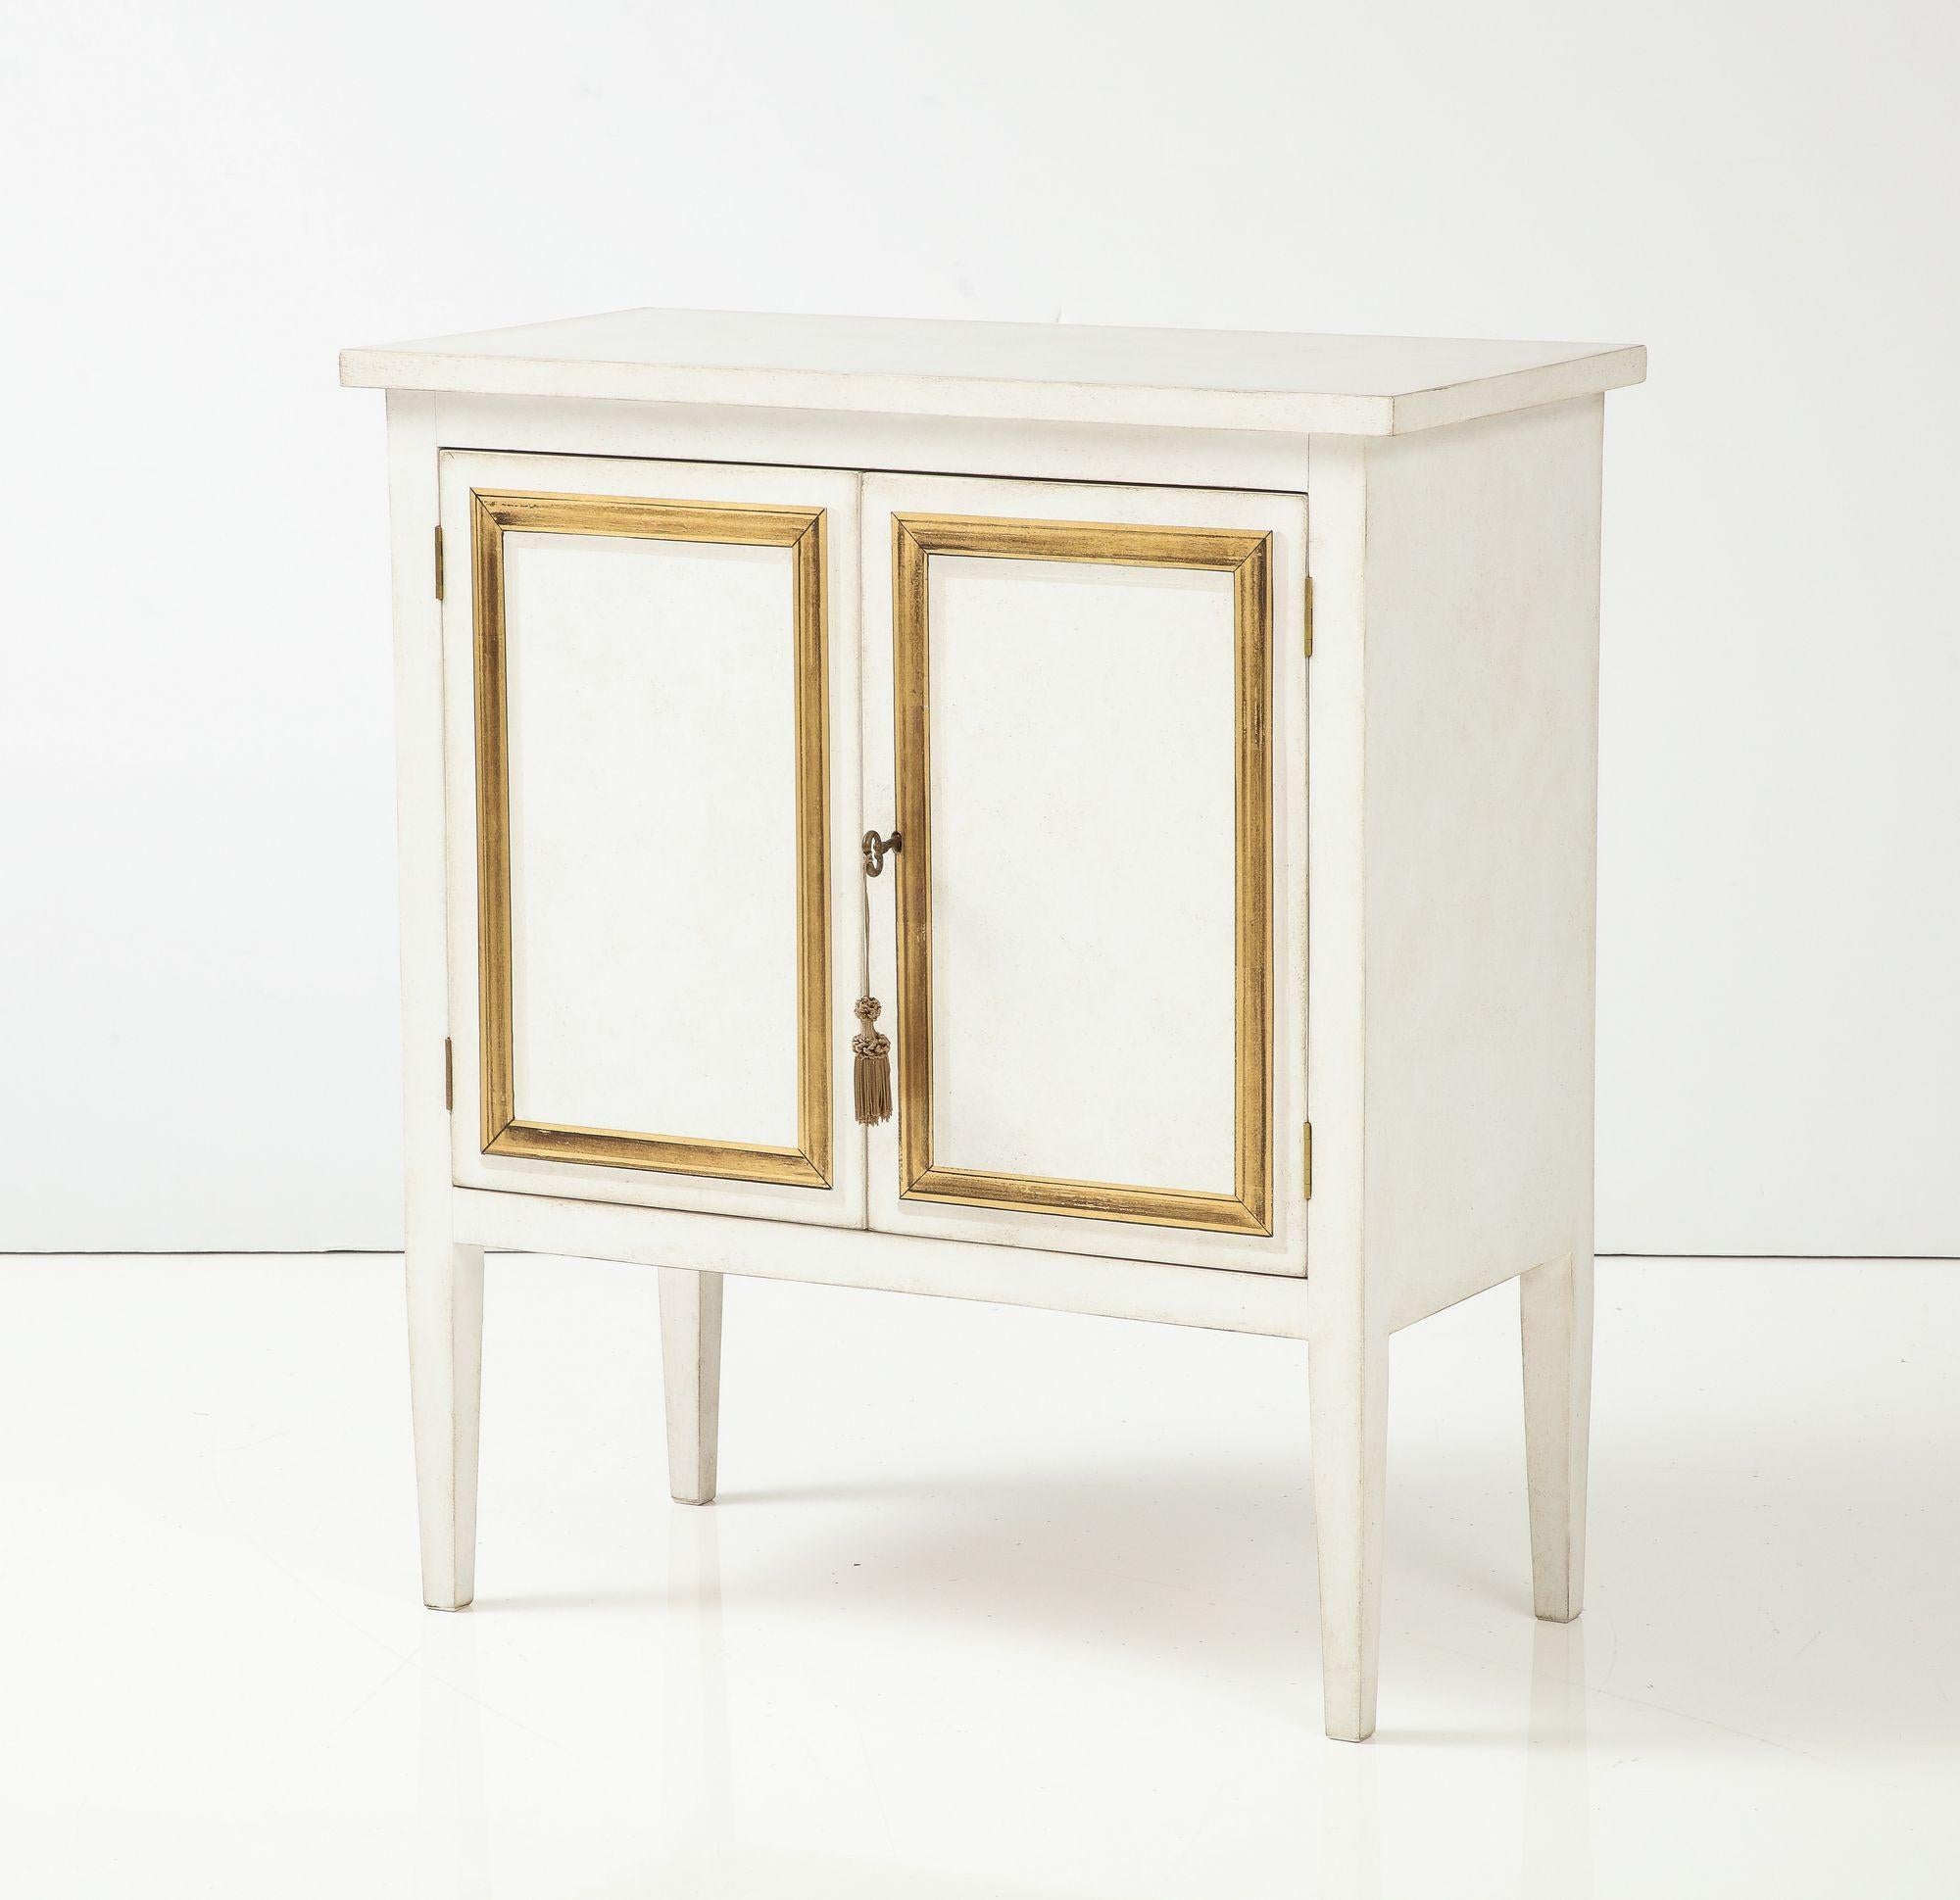 Contemporary Handpainted Ivory and Gold Trompe l'oeil Cabinet or Nightstand, 21st C. For Sale